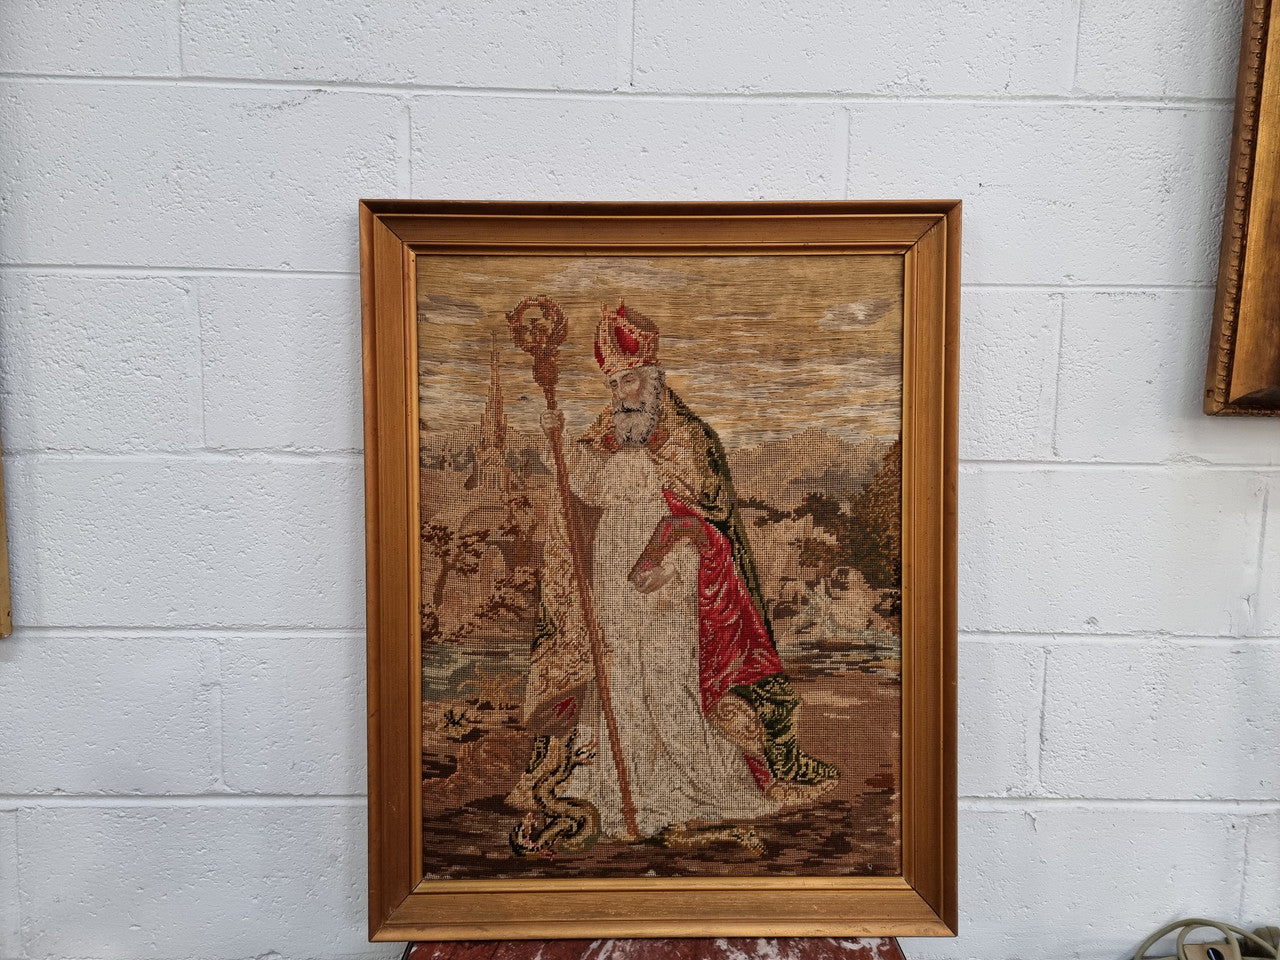 Antique Wool-Work Religious Framed Picture